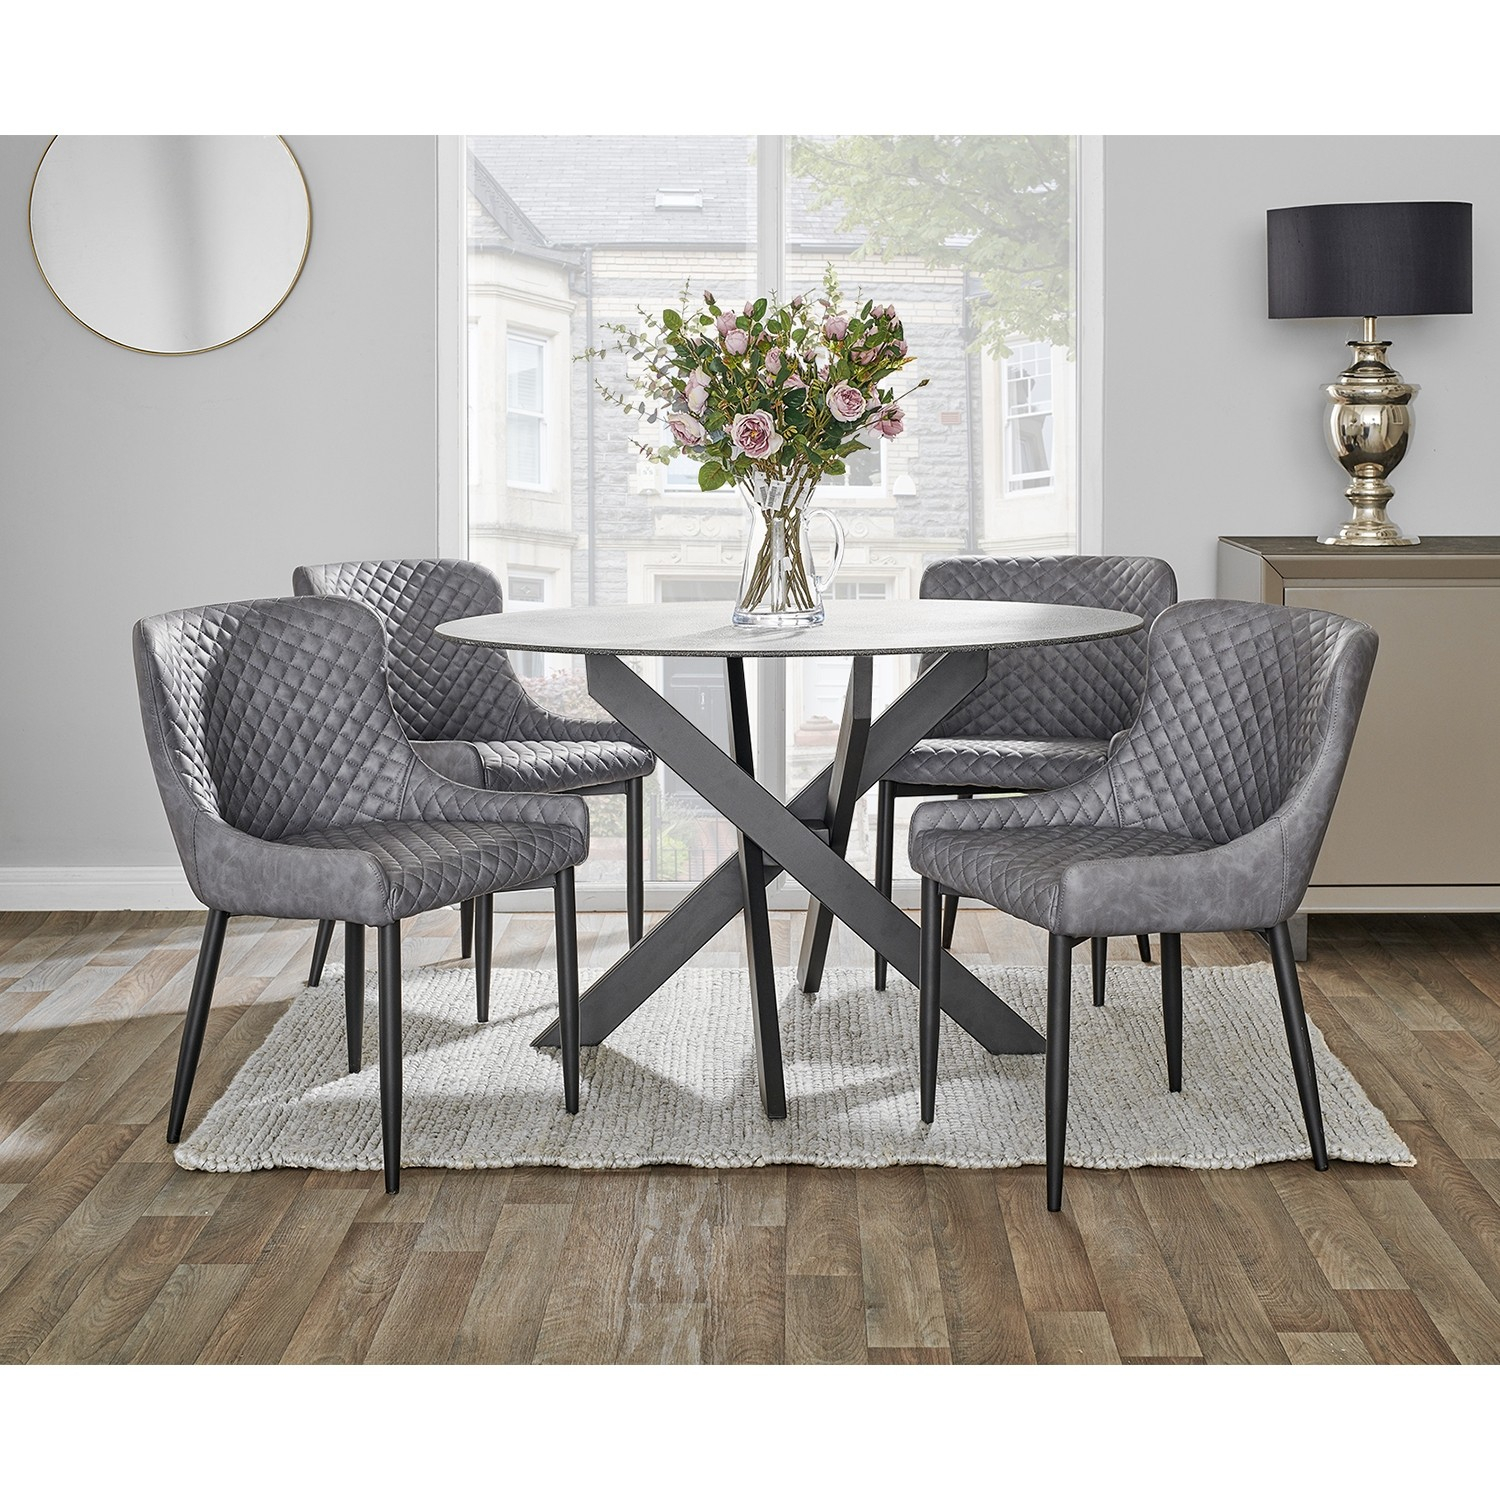 Casa Cairns Round Table 4 Chairs Dining Set in sizing 1500 X 1500